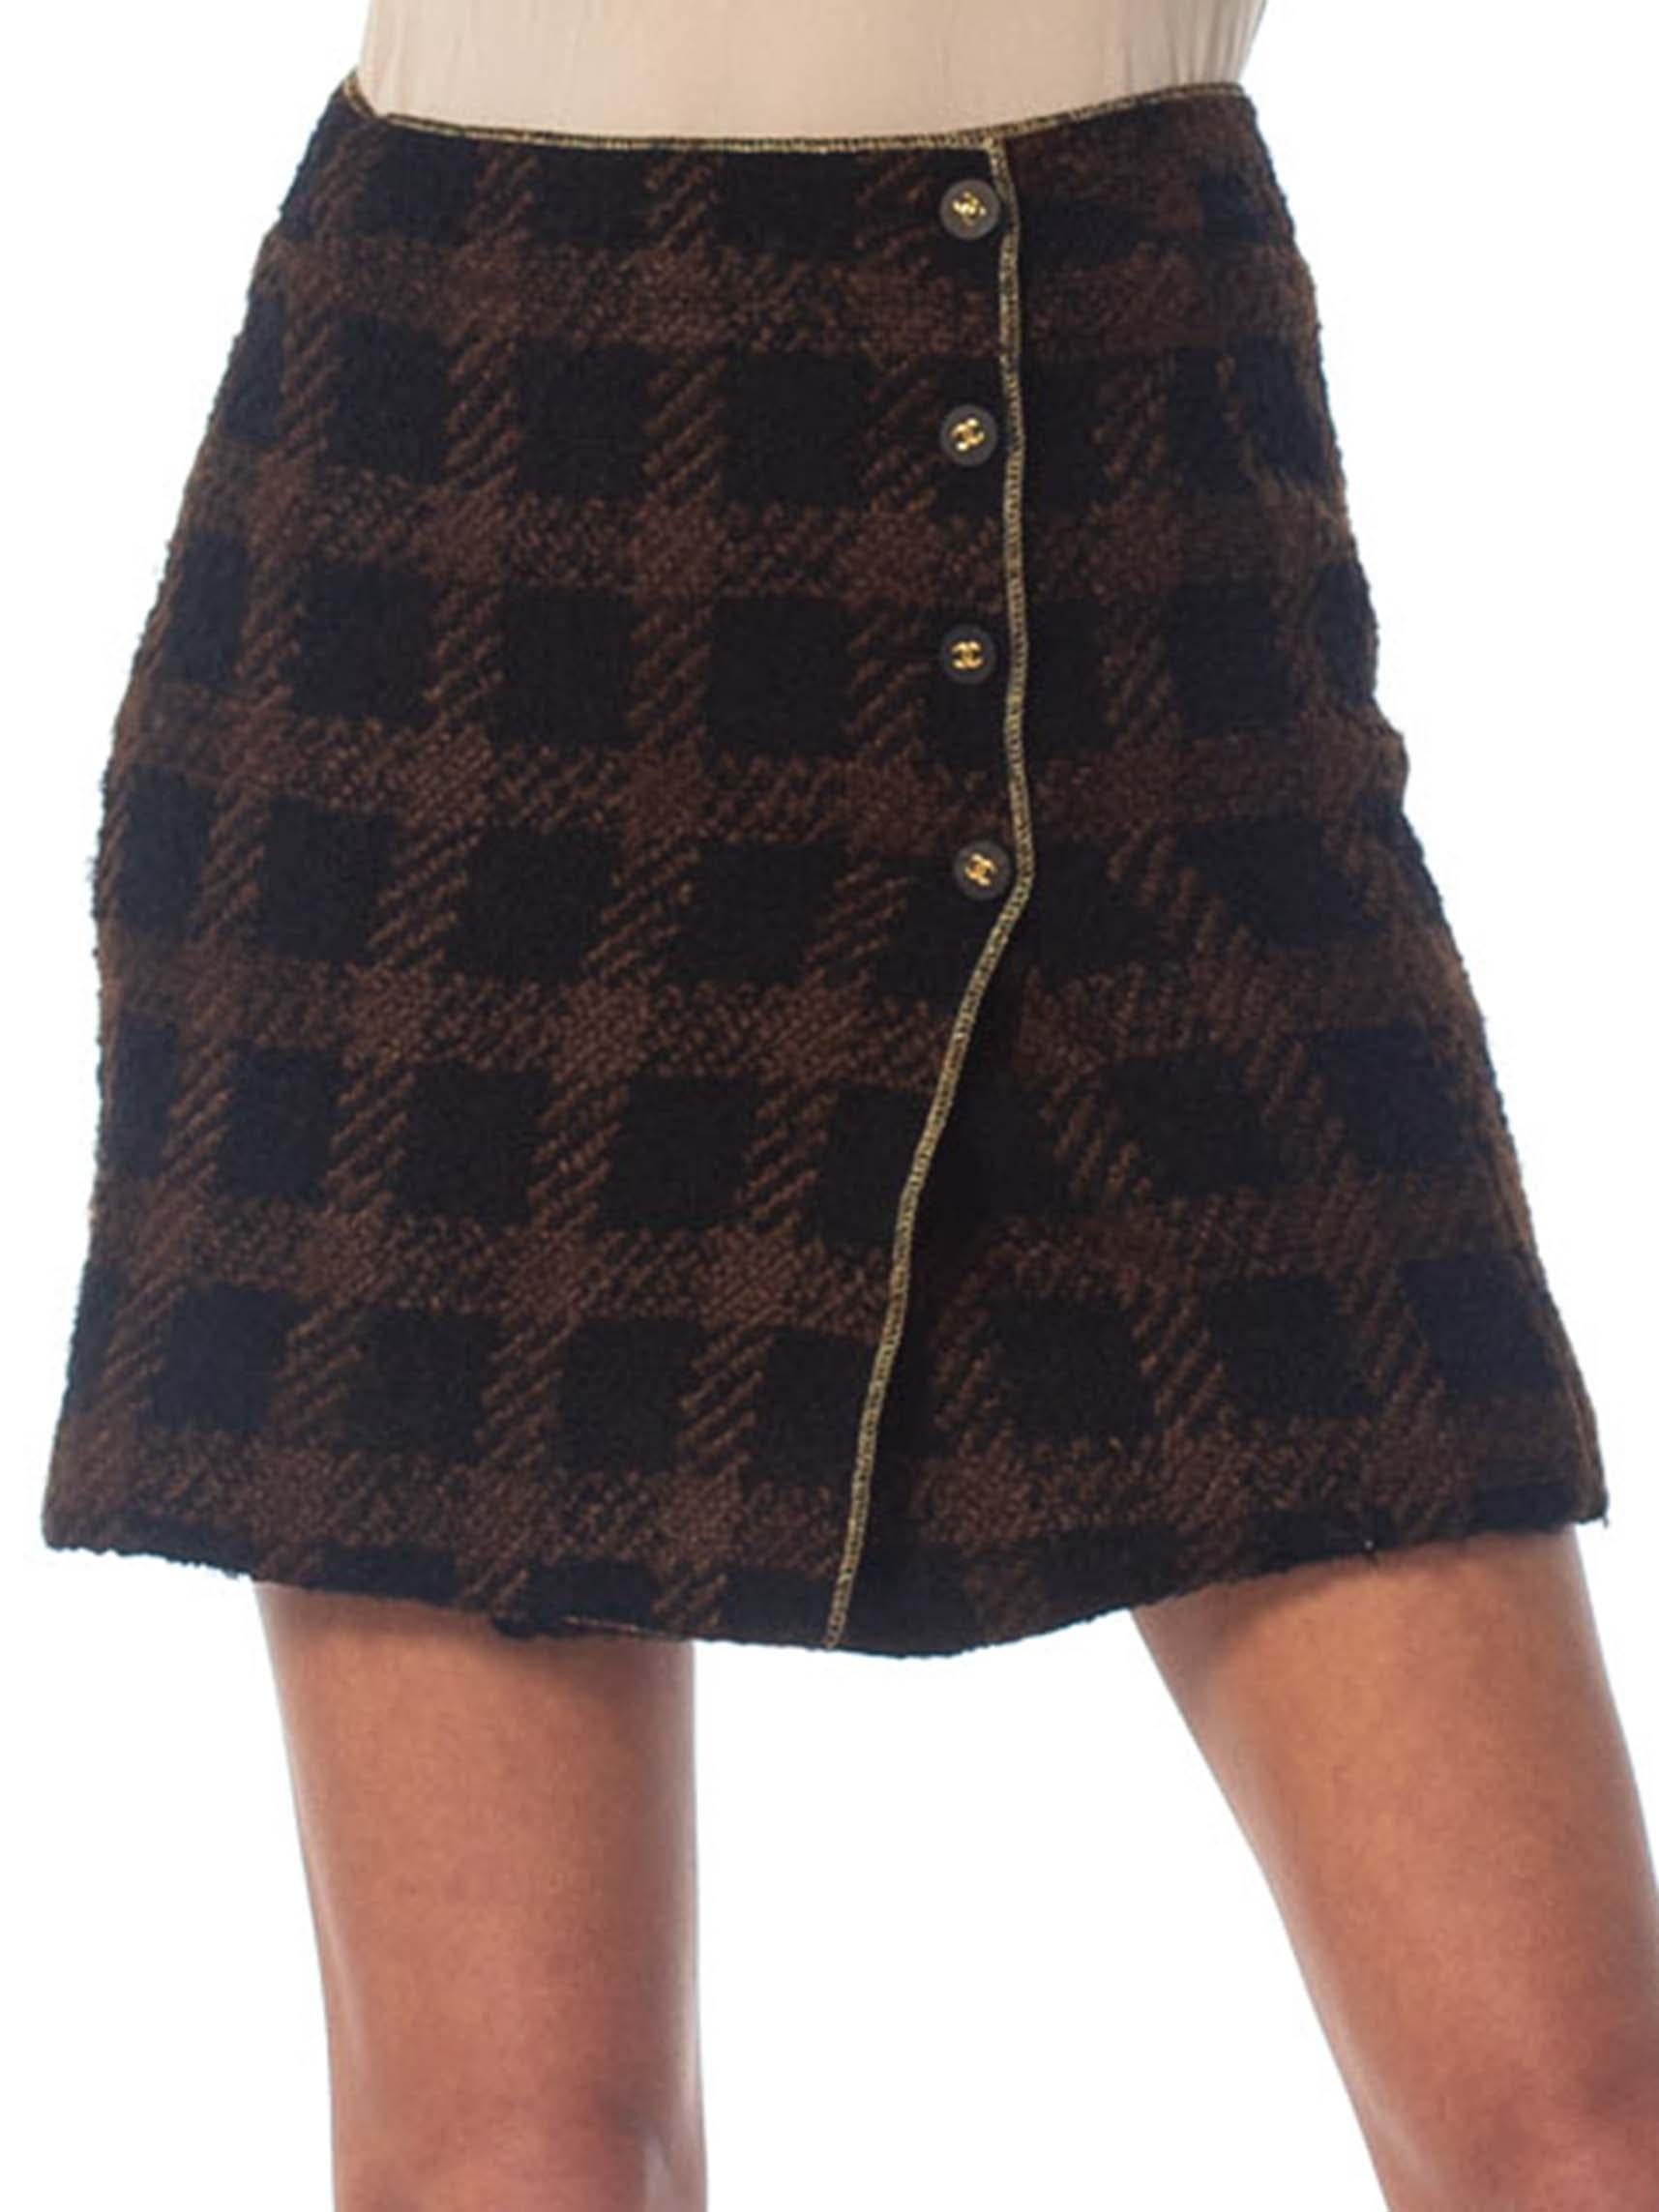 1990S CHANEL Black & Brown With  Gold Lamé Wool Mini Skirt Suit Lined In Silk For Sale 5